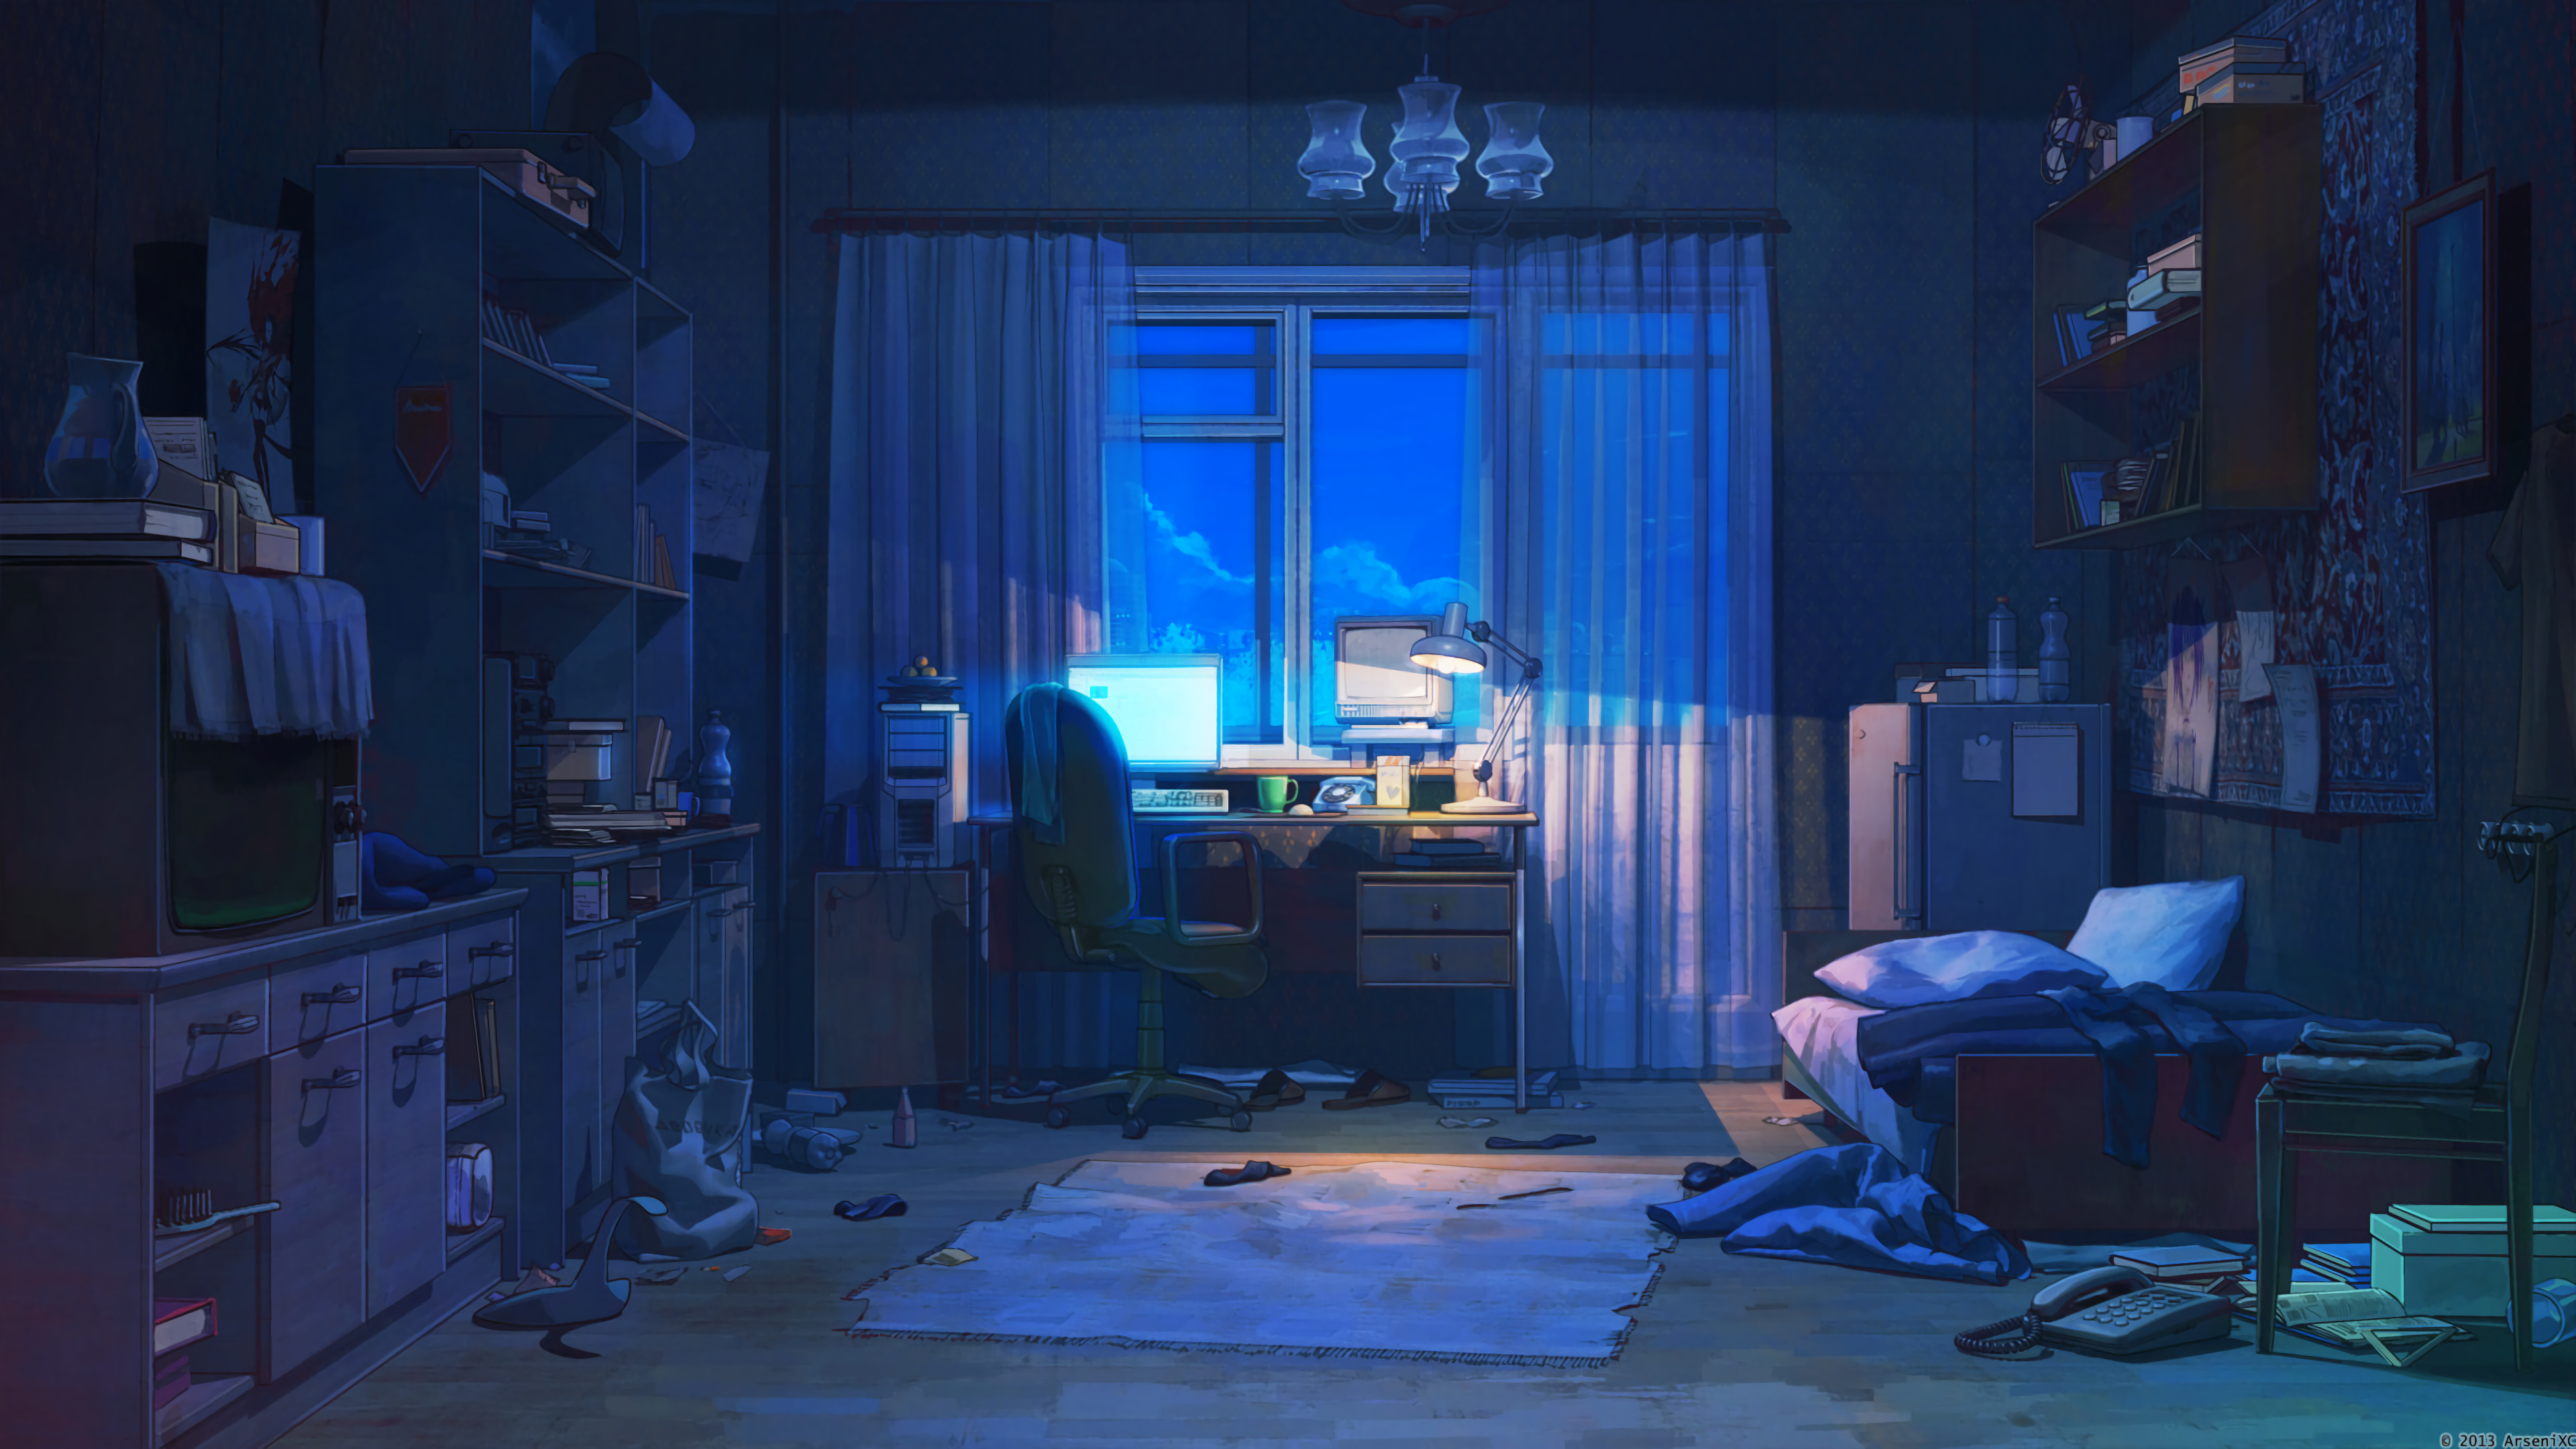 Anime 3840x2160 room vibes computer chair messy lamp window balcony chandeliers rug bed